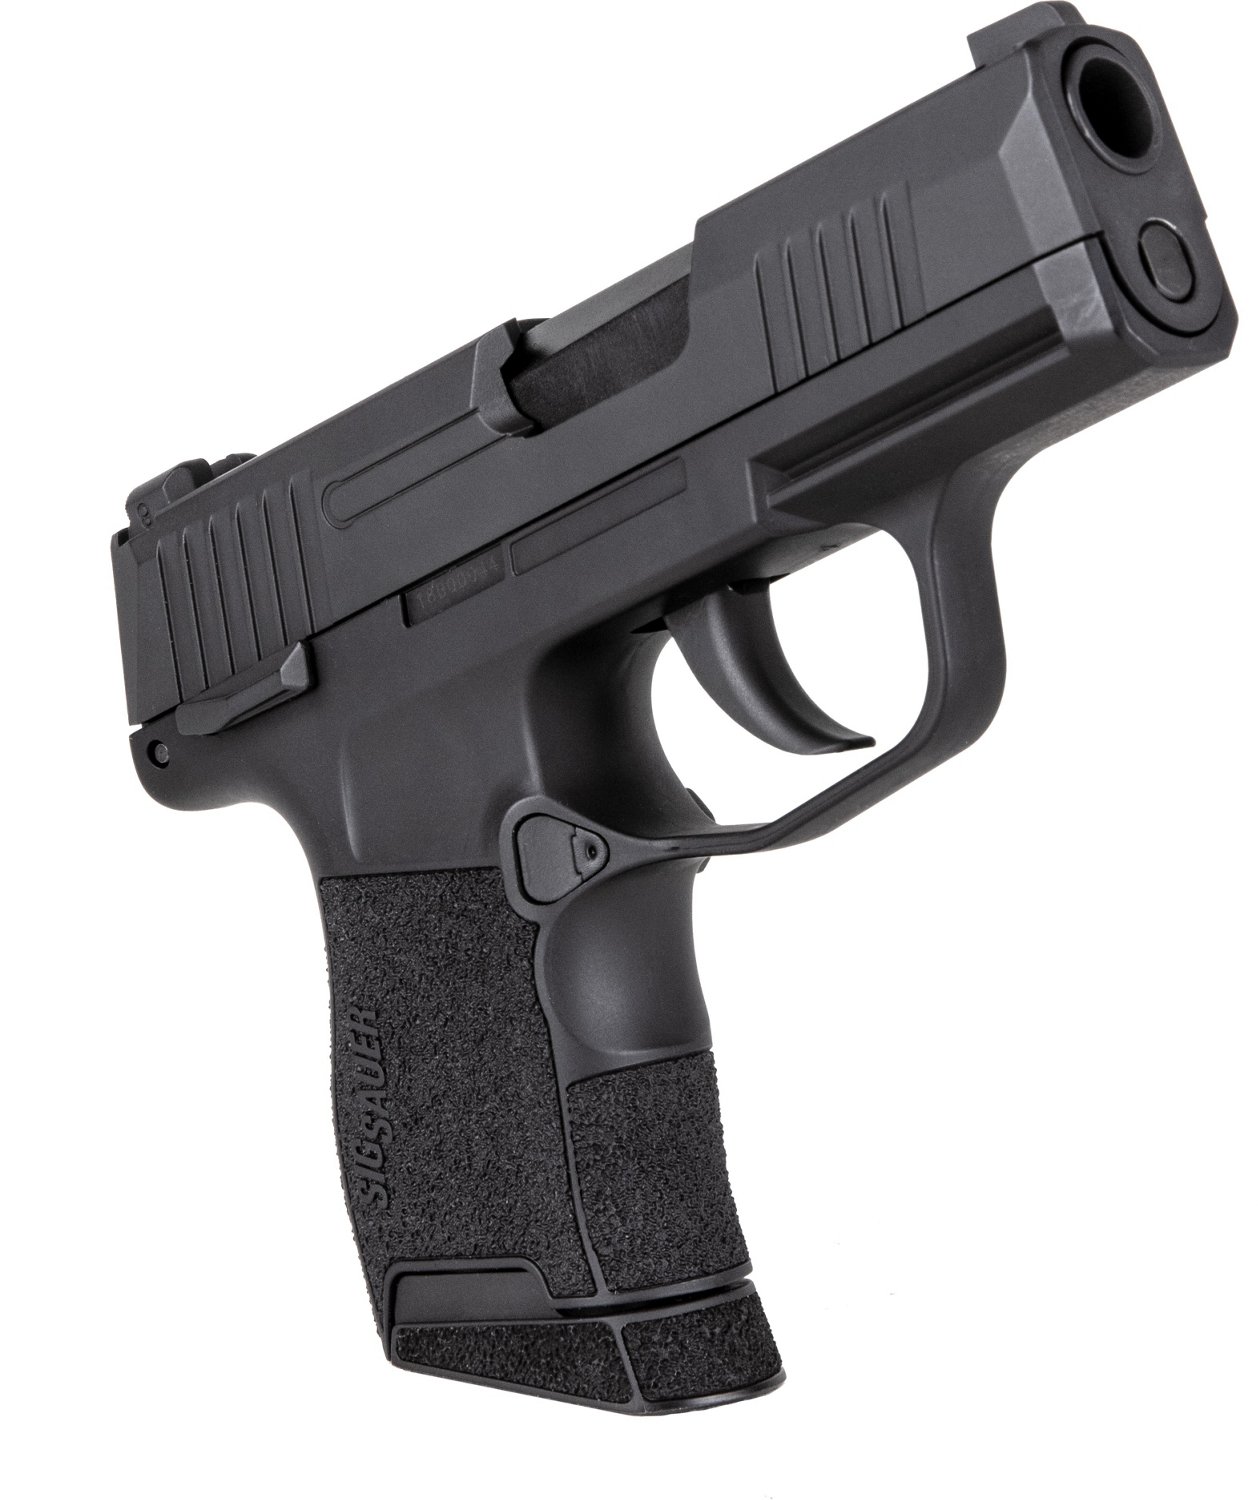 Sig Sauer P365 CO2 Blowback Airsoft Pistol (AIR-PF-365) – Sports and Gadgets